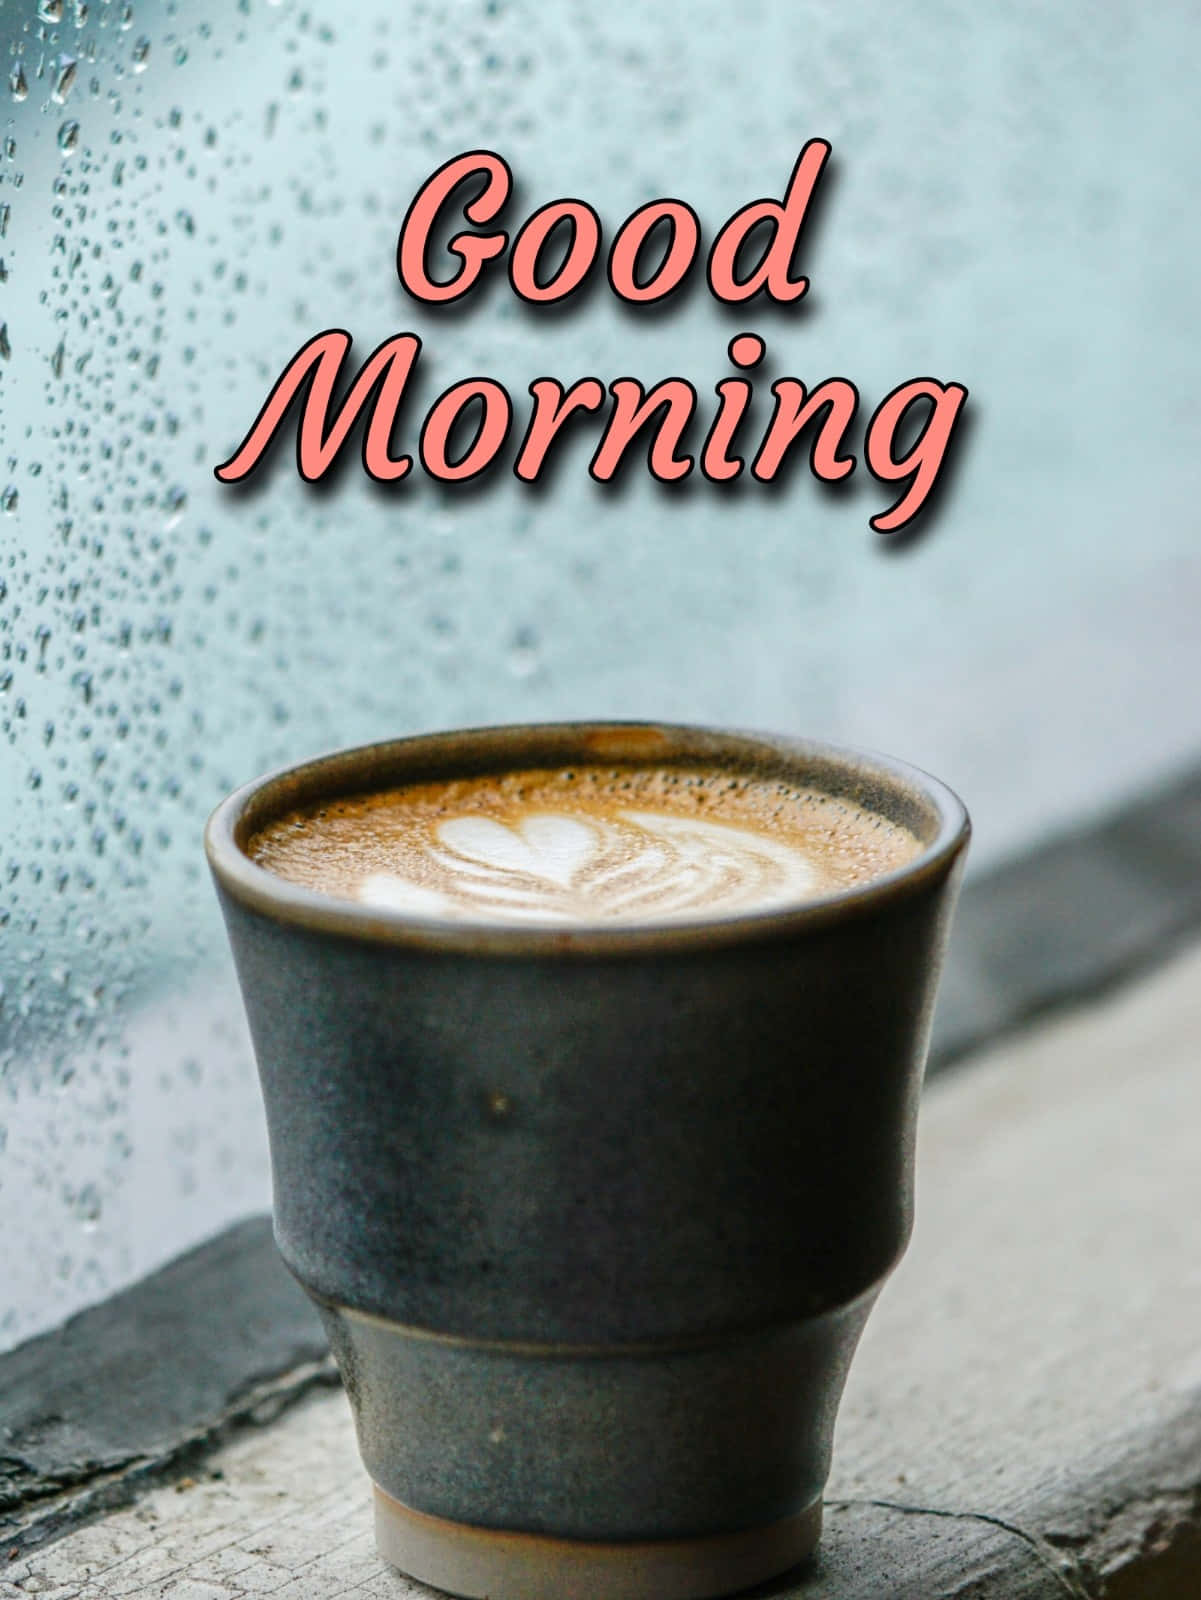 Good Morning Cup Of Coffee Wallpaper